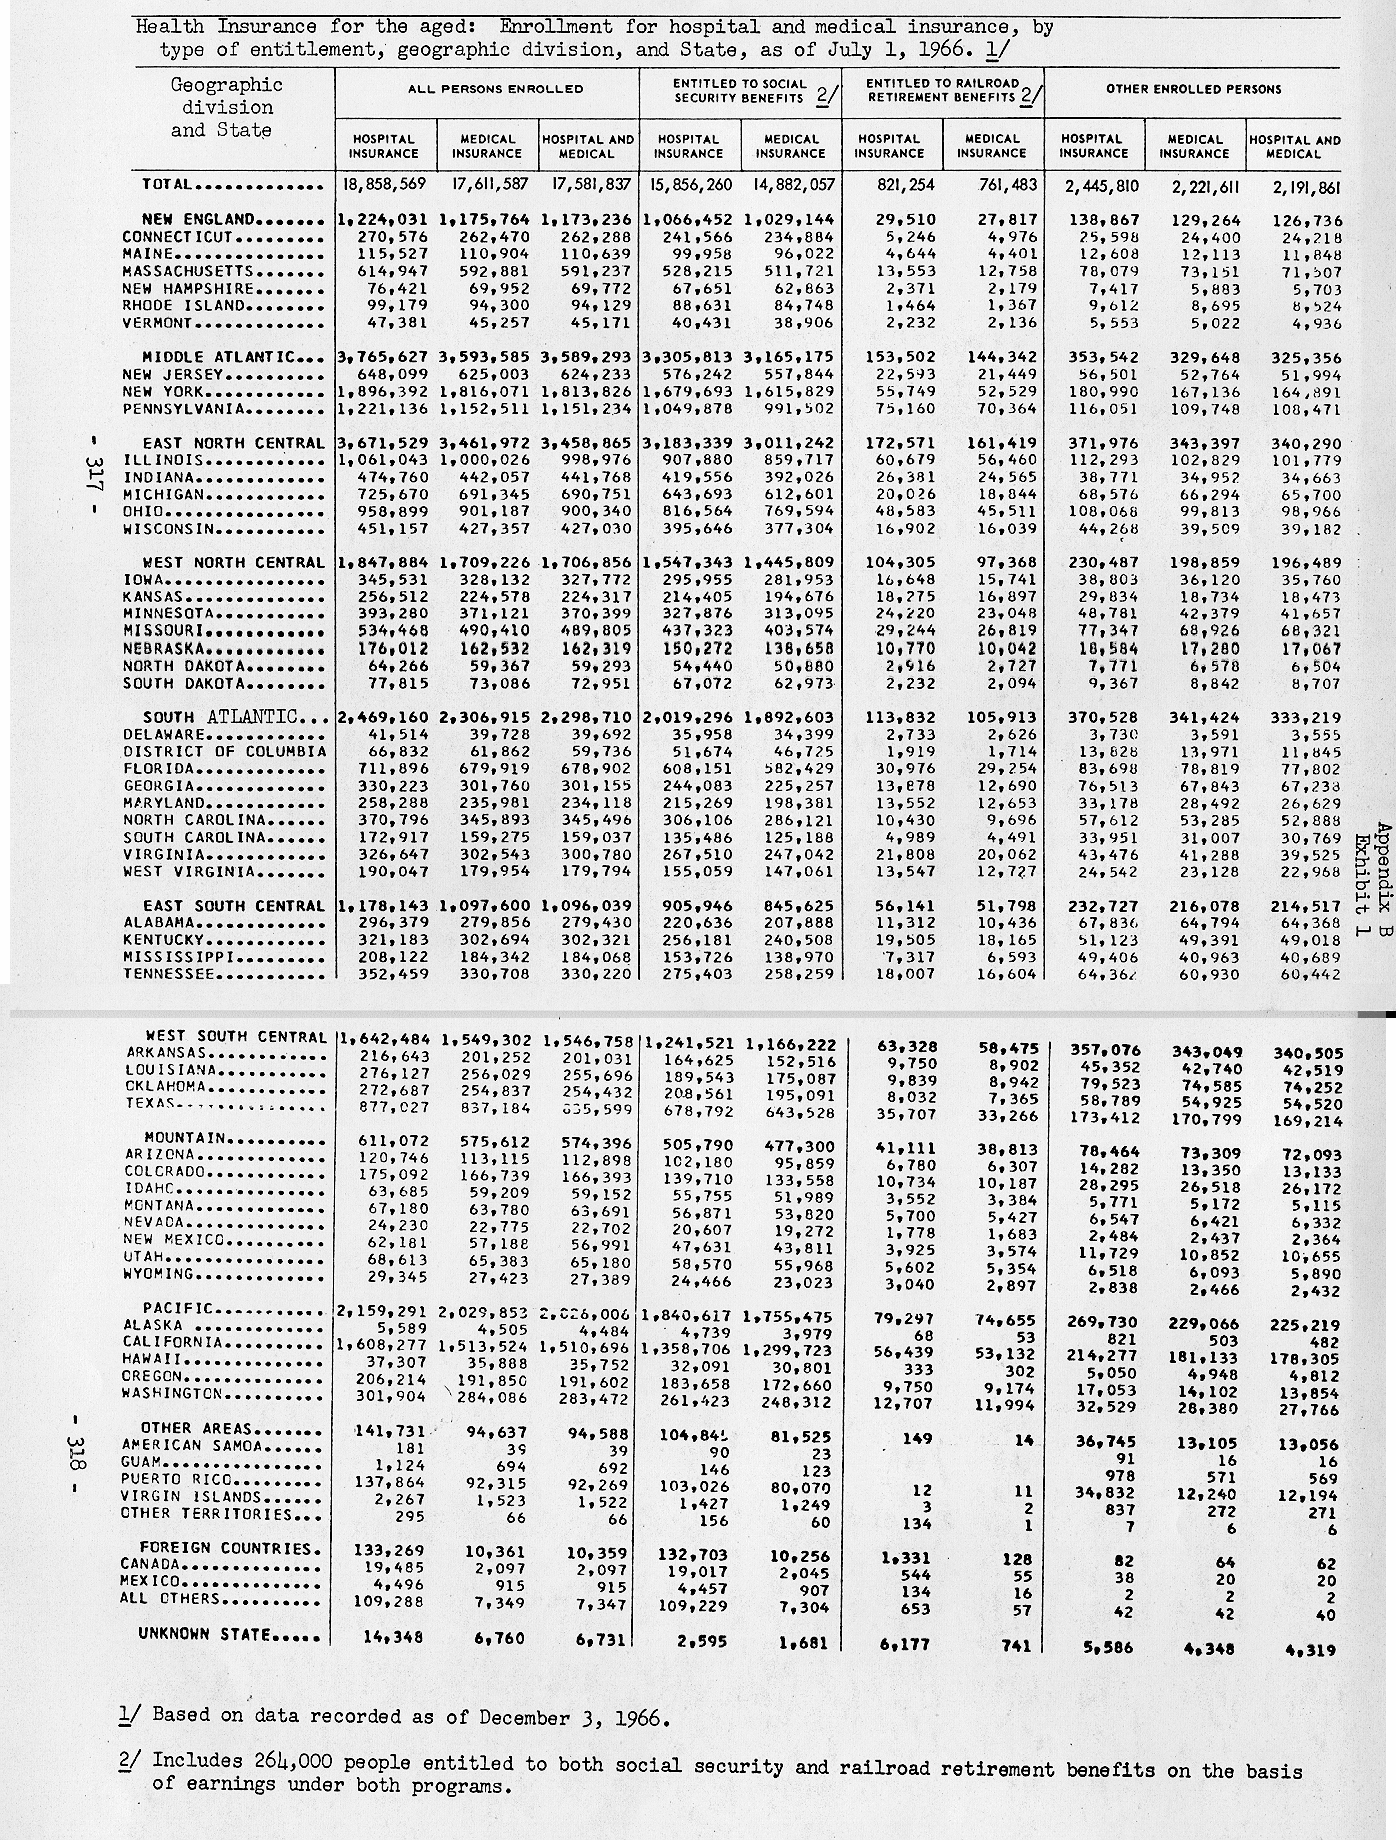 table from pages 317 and 318